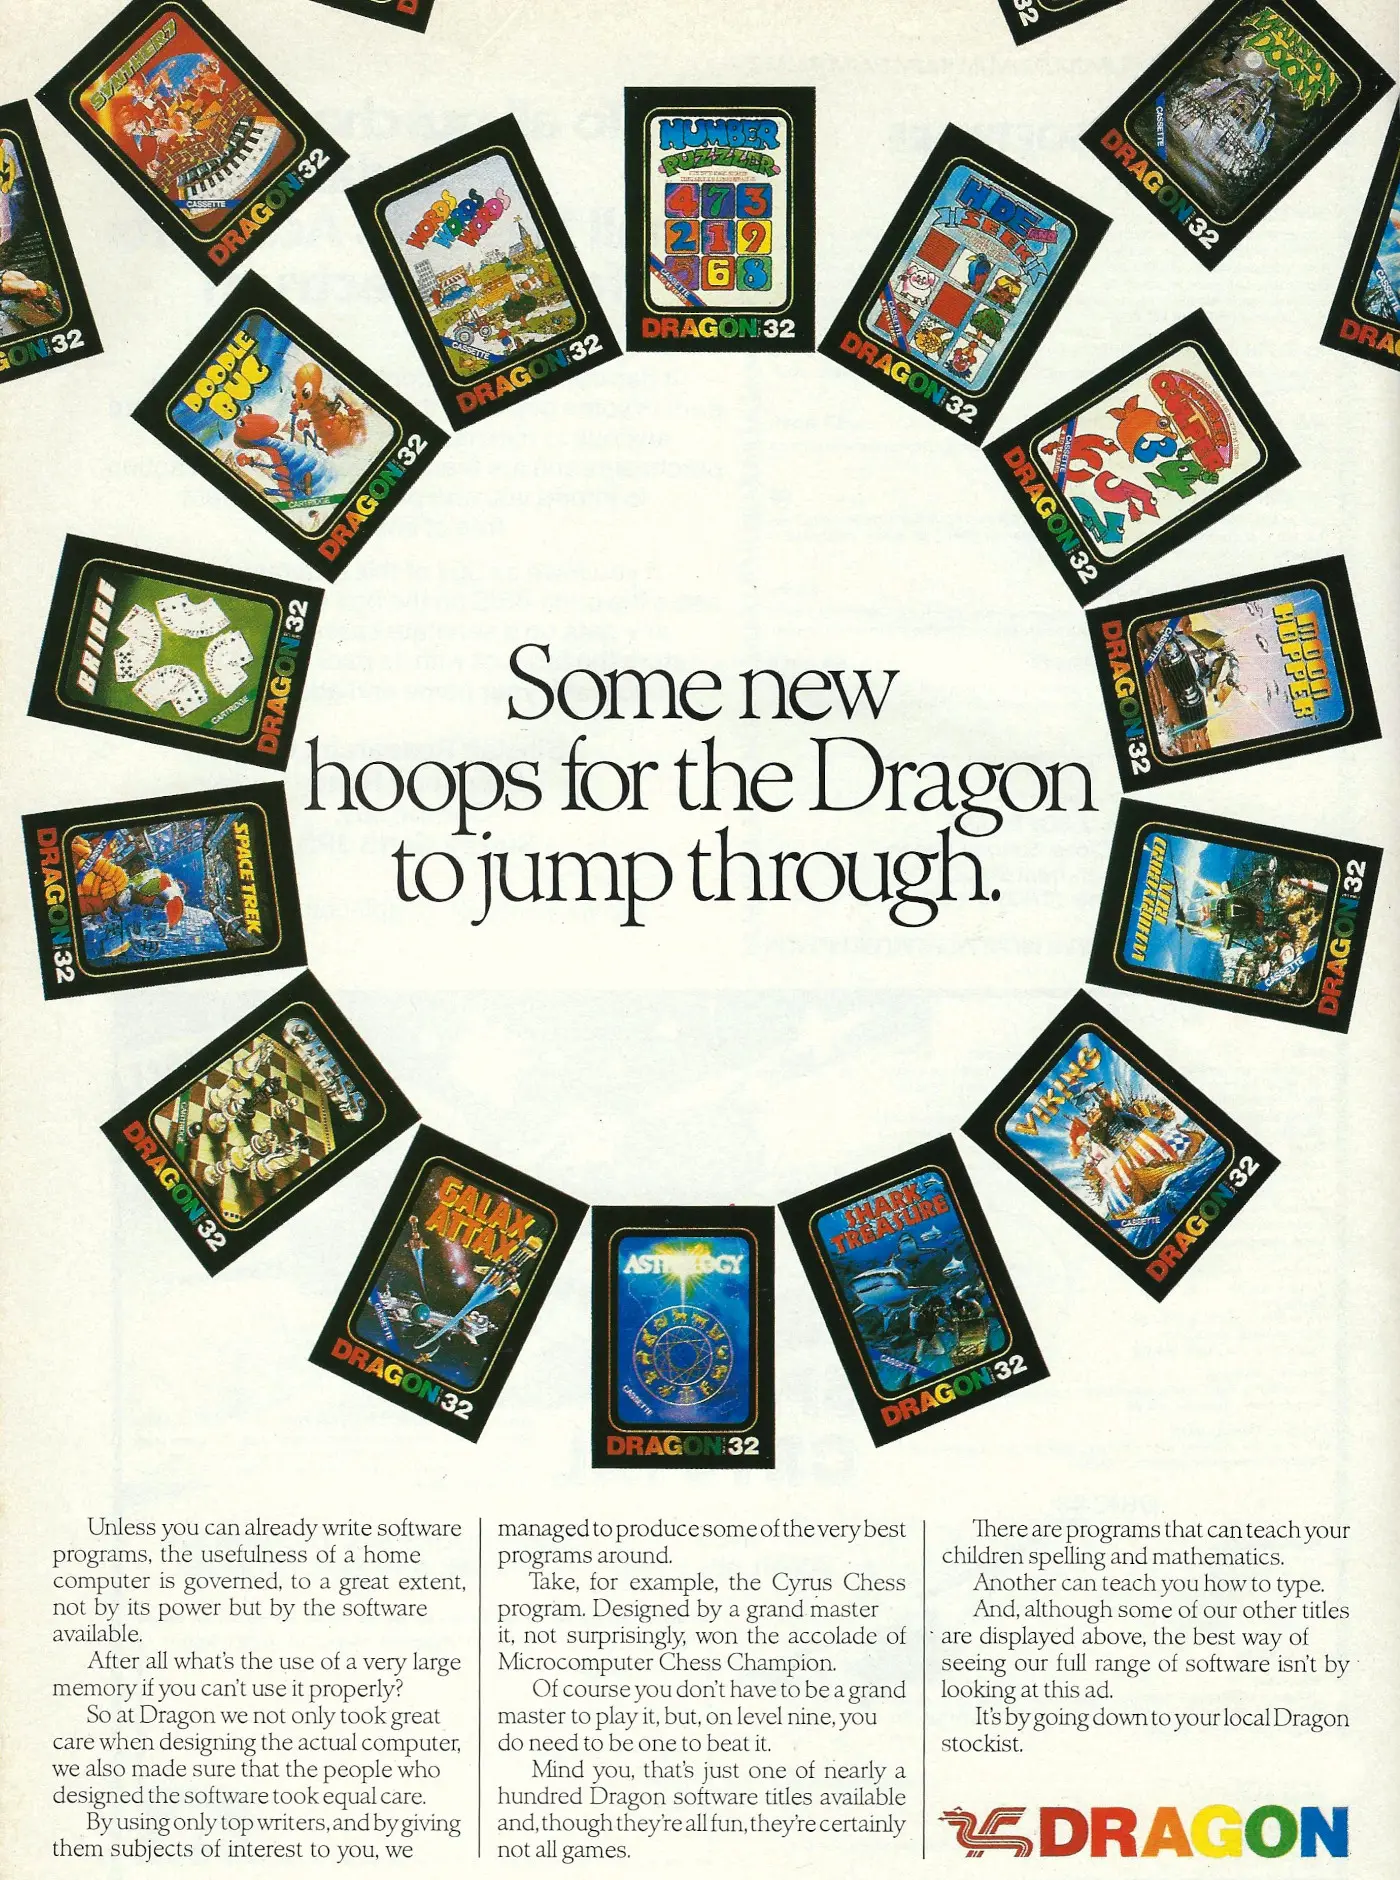 Dragon Data Advert: Some new hoops for the Dragon to jump through, from Electronics and Computing Monthly, November 1983